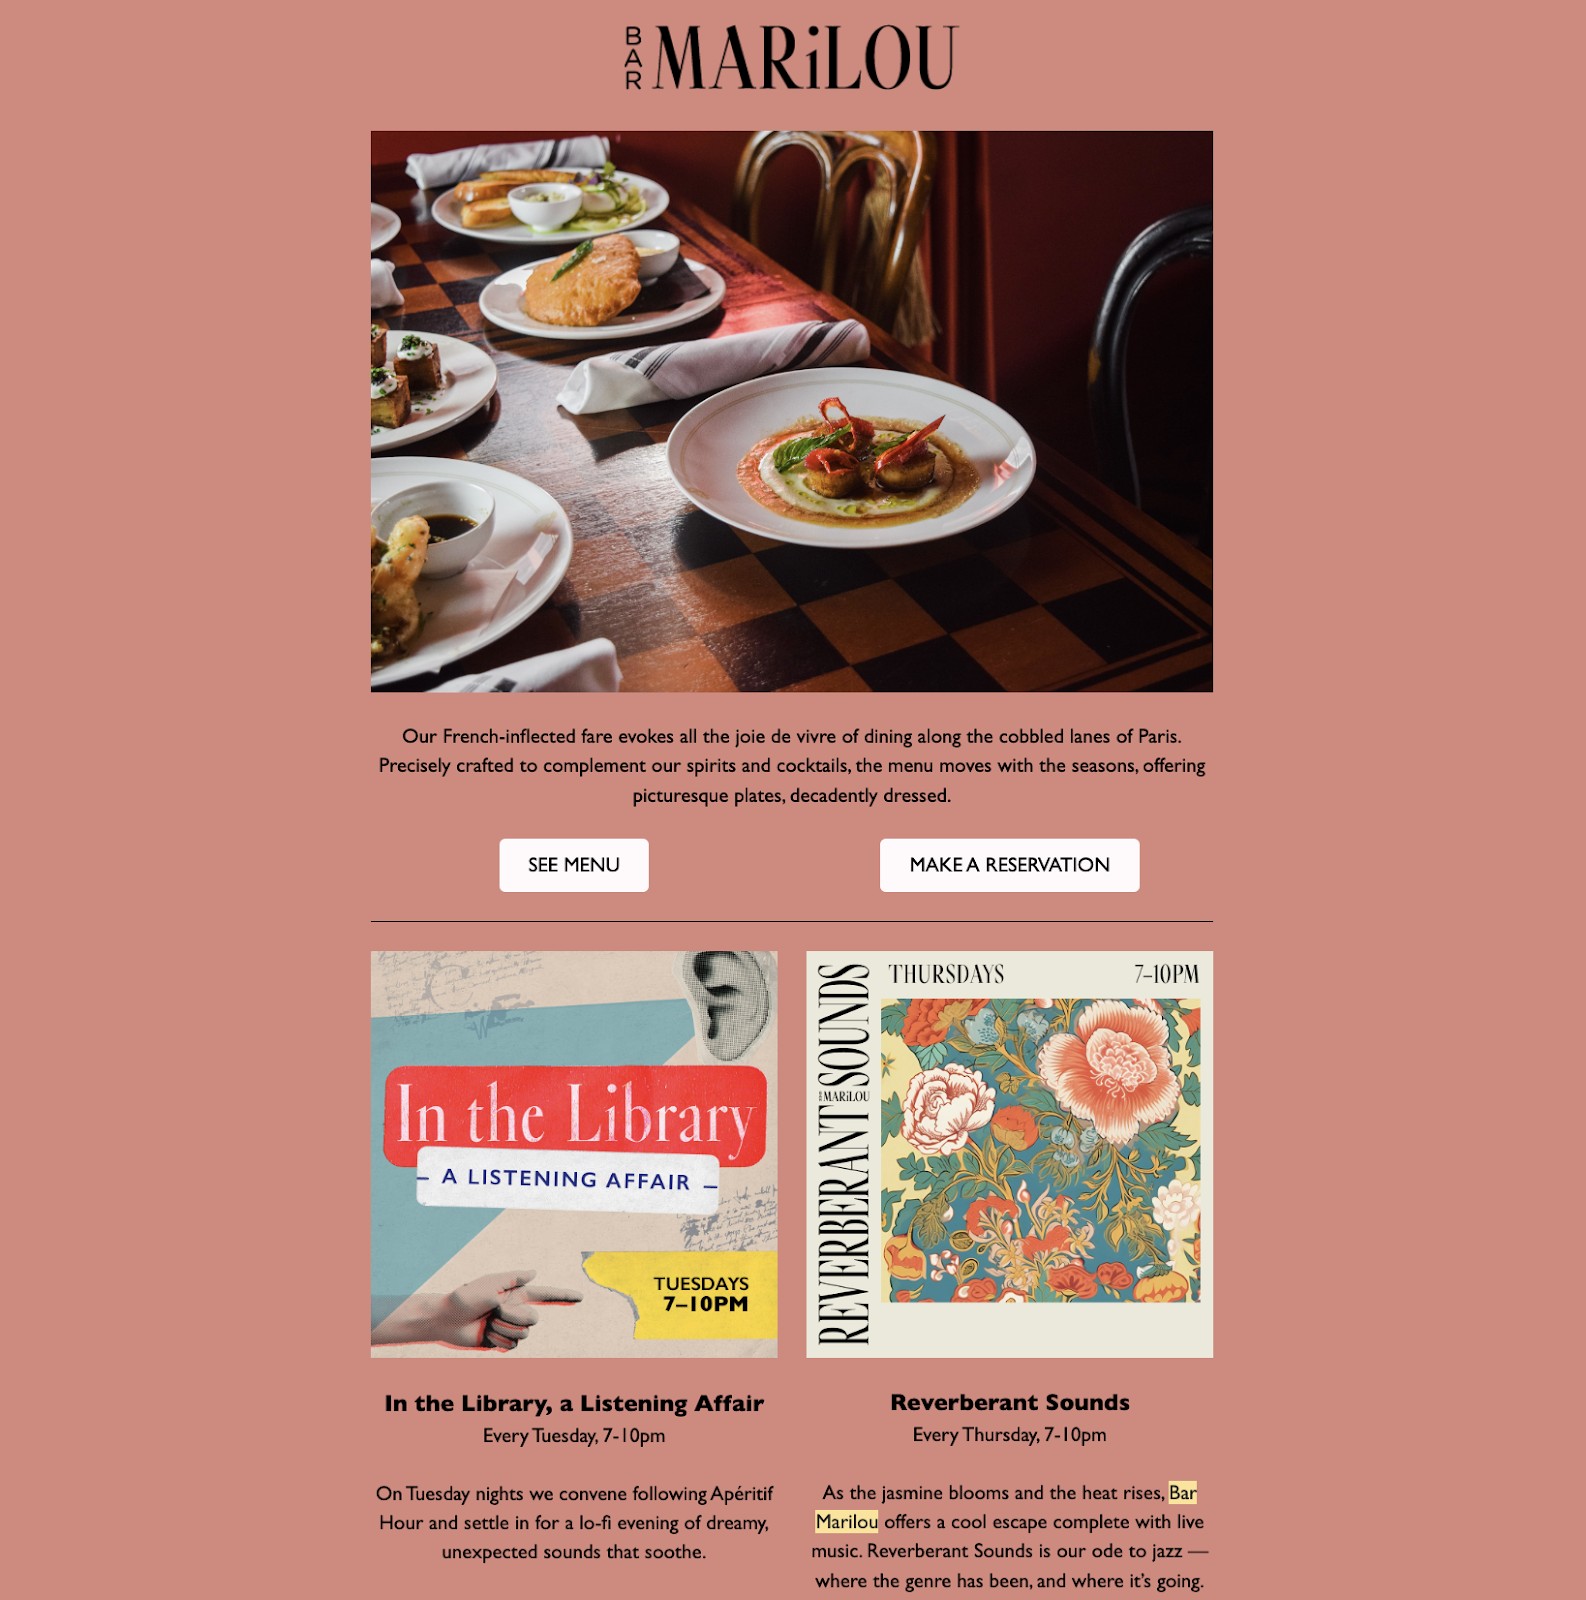 Restaurant marketing ideas: An email newsletter from New Orleans-based restaurant Bar Marilou. The email includes a high-quality photo of plated dishes, CTA buttons to see the menu or make a reservation, and information about two upcoming events.